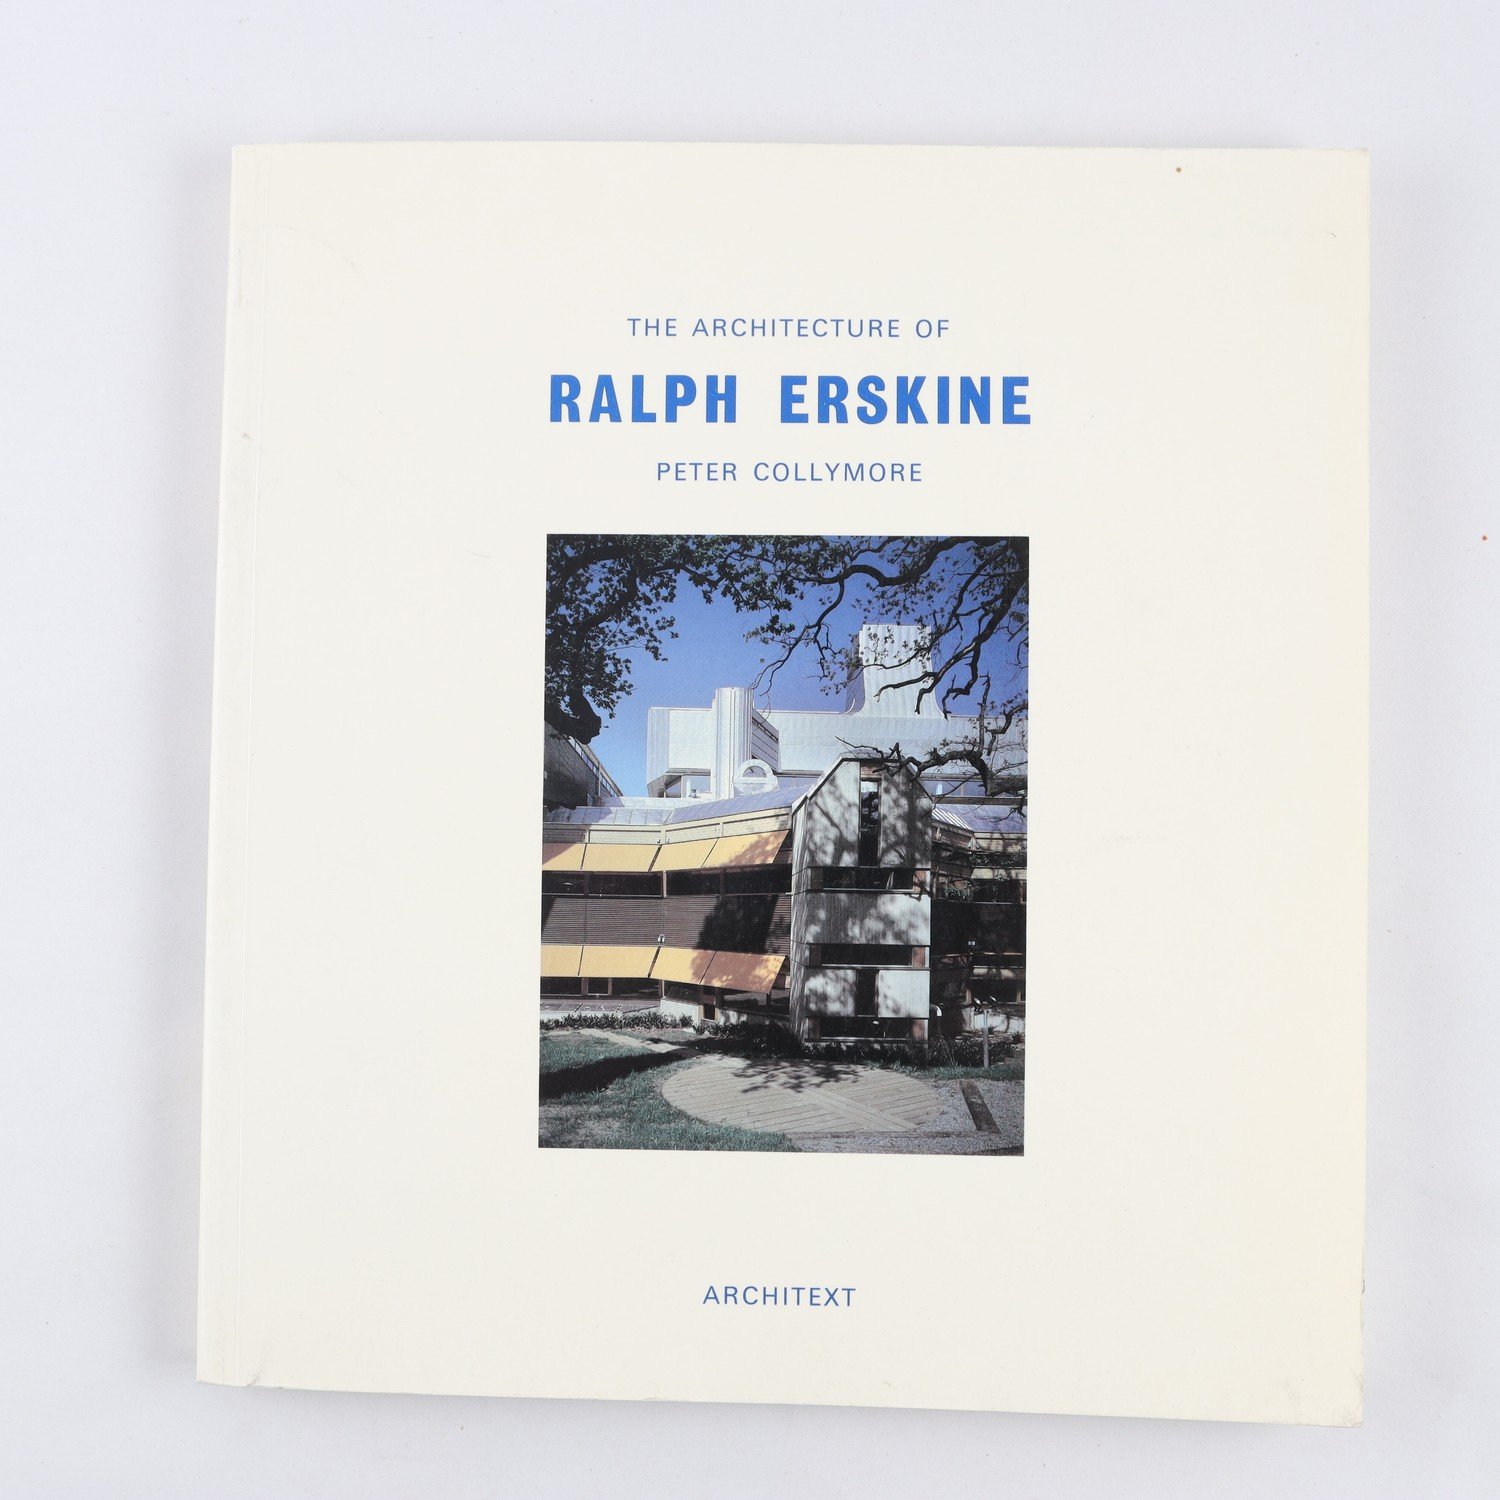 The Architecture of Ralph Erskine, by Peter Collymore